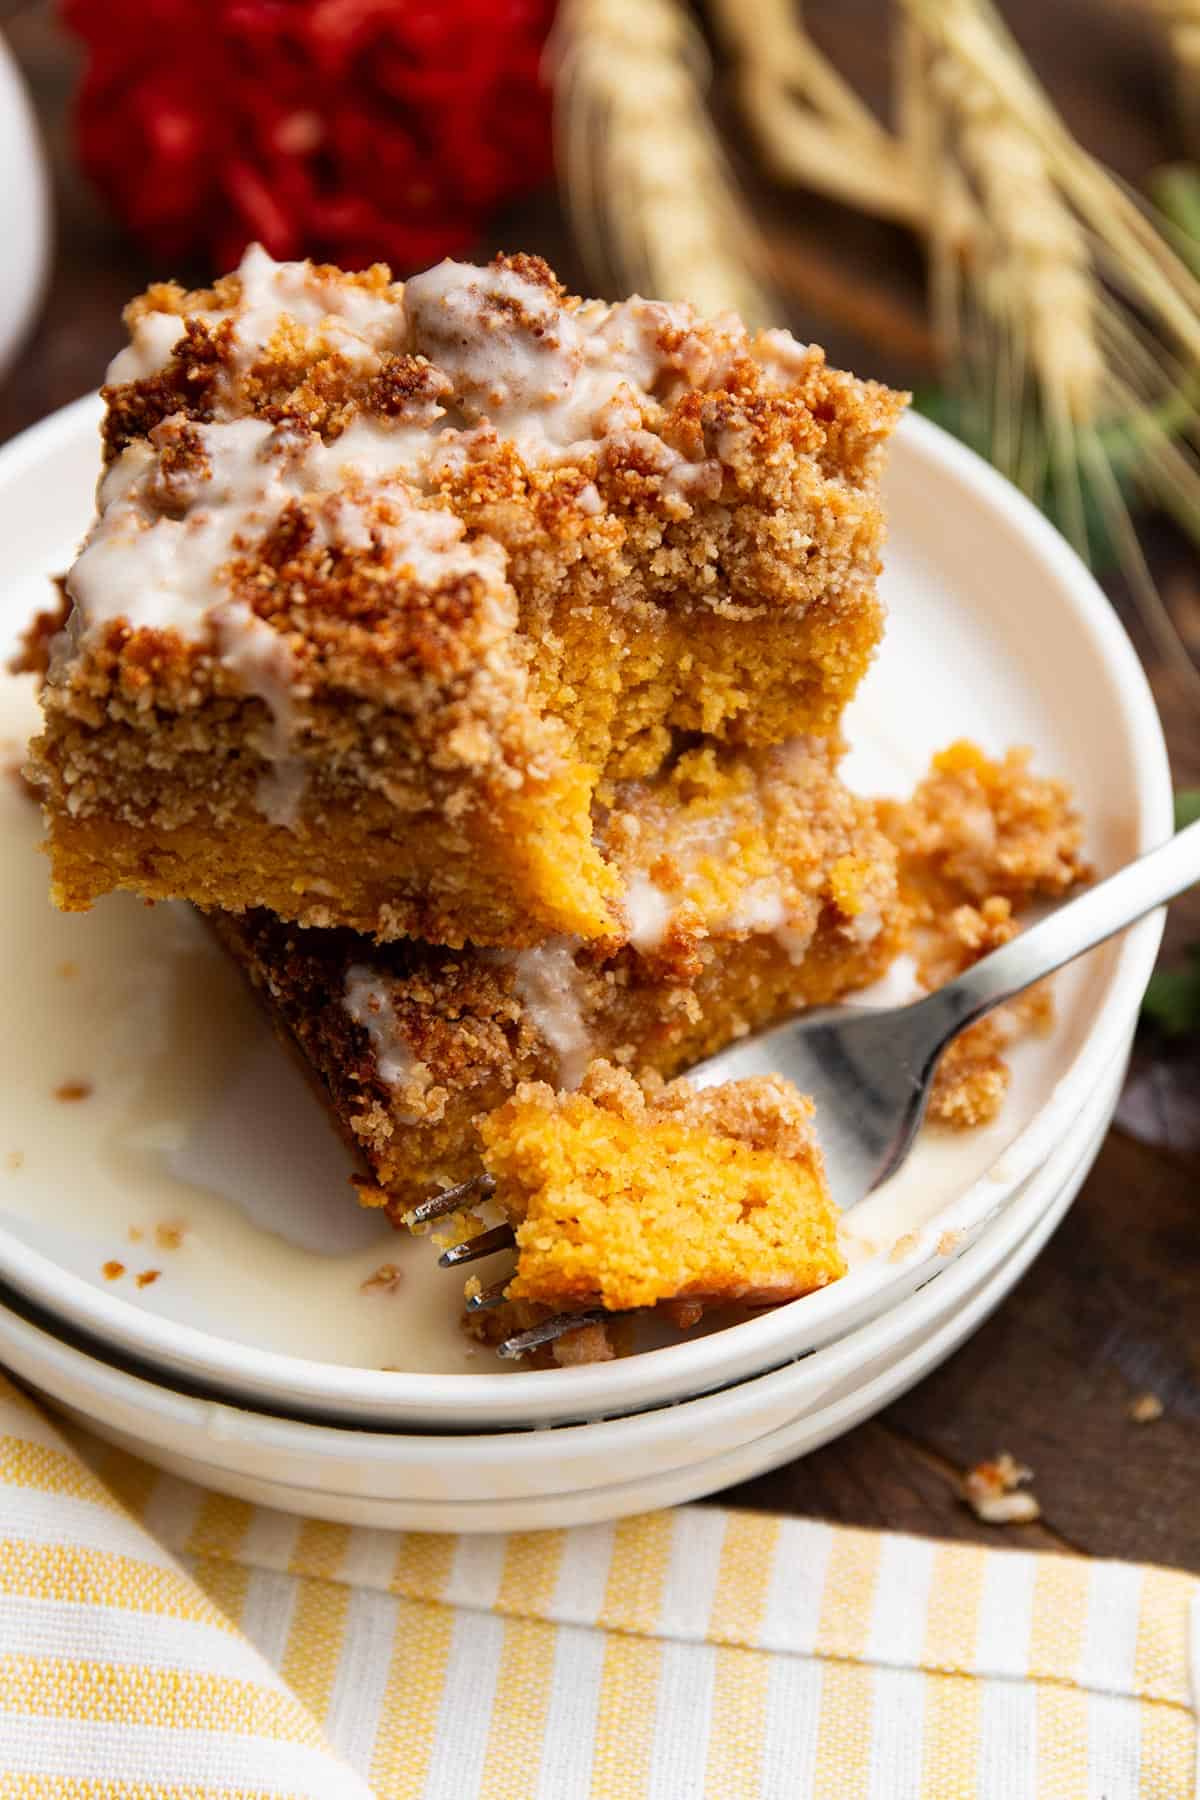 Two pieces of Keto Pumpkin Crumb Cake on a white plate with a forkful taken out of one.